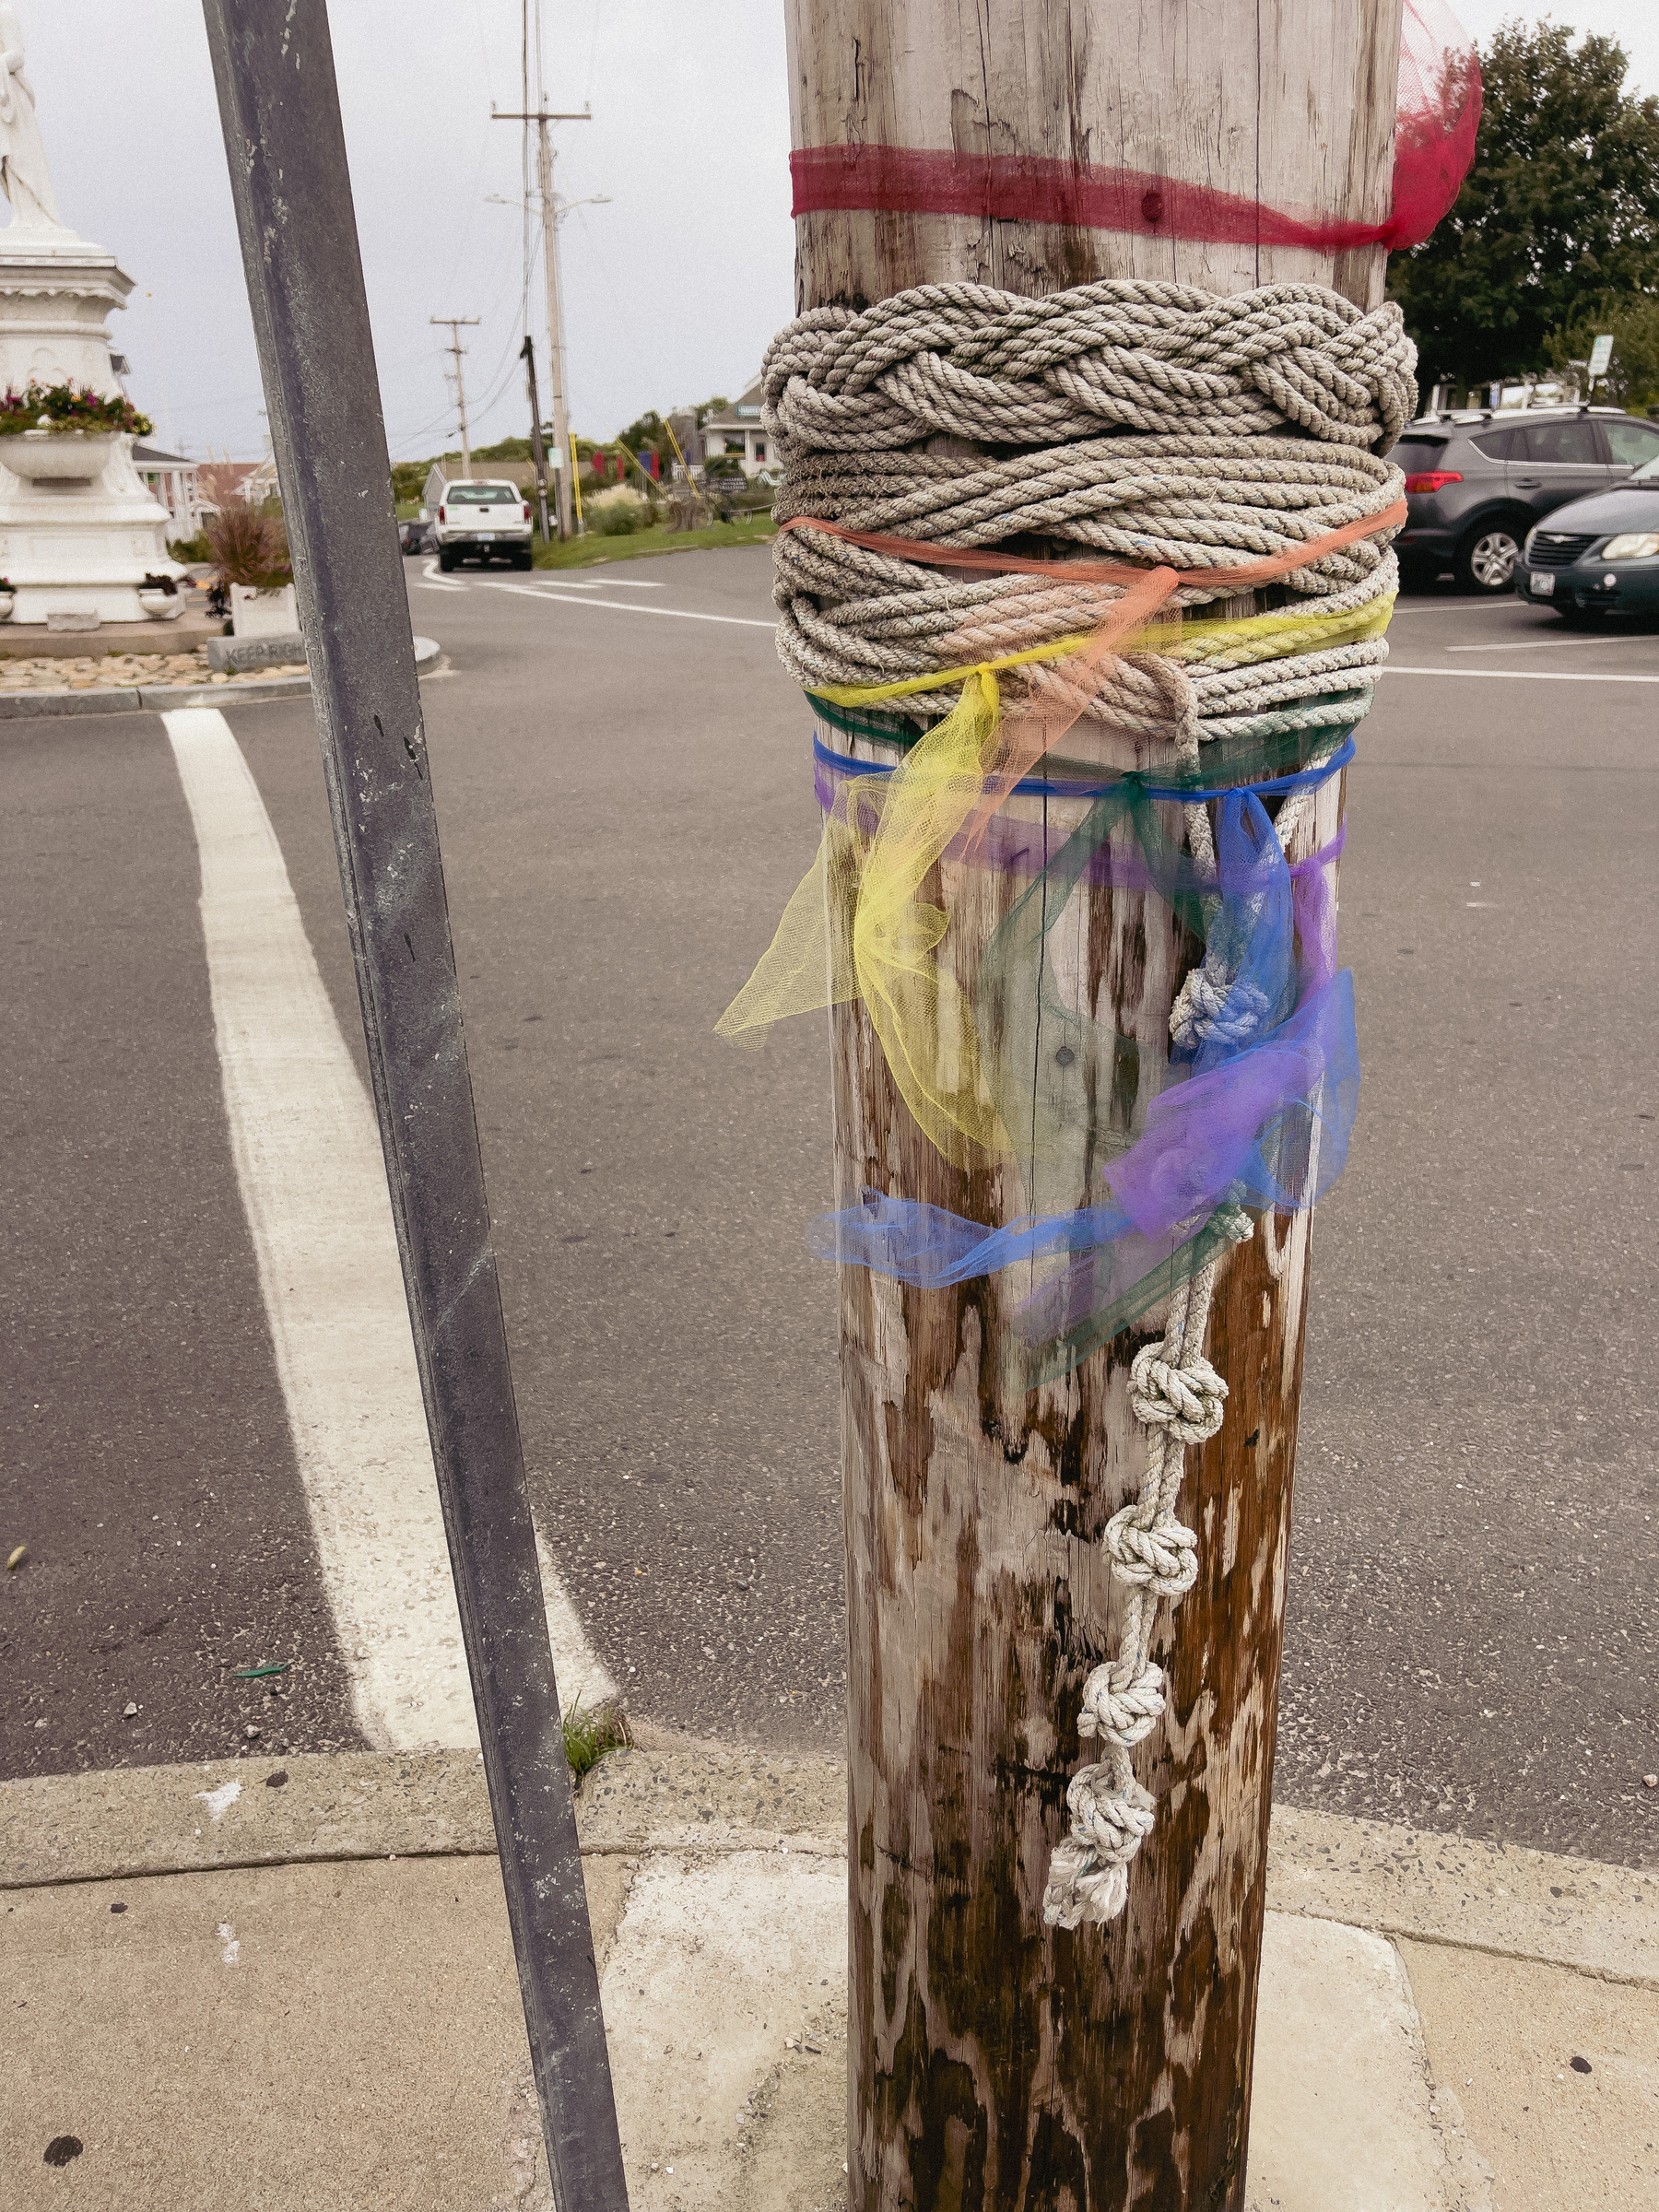 Nautical rope weaving around telephone pole. Gauzy red, yellow and blue gay pride fabric tied over rope.